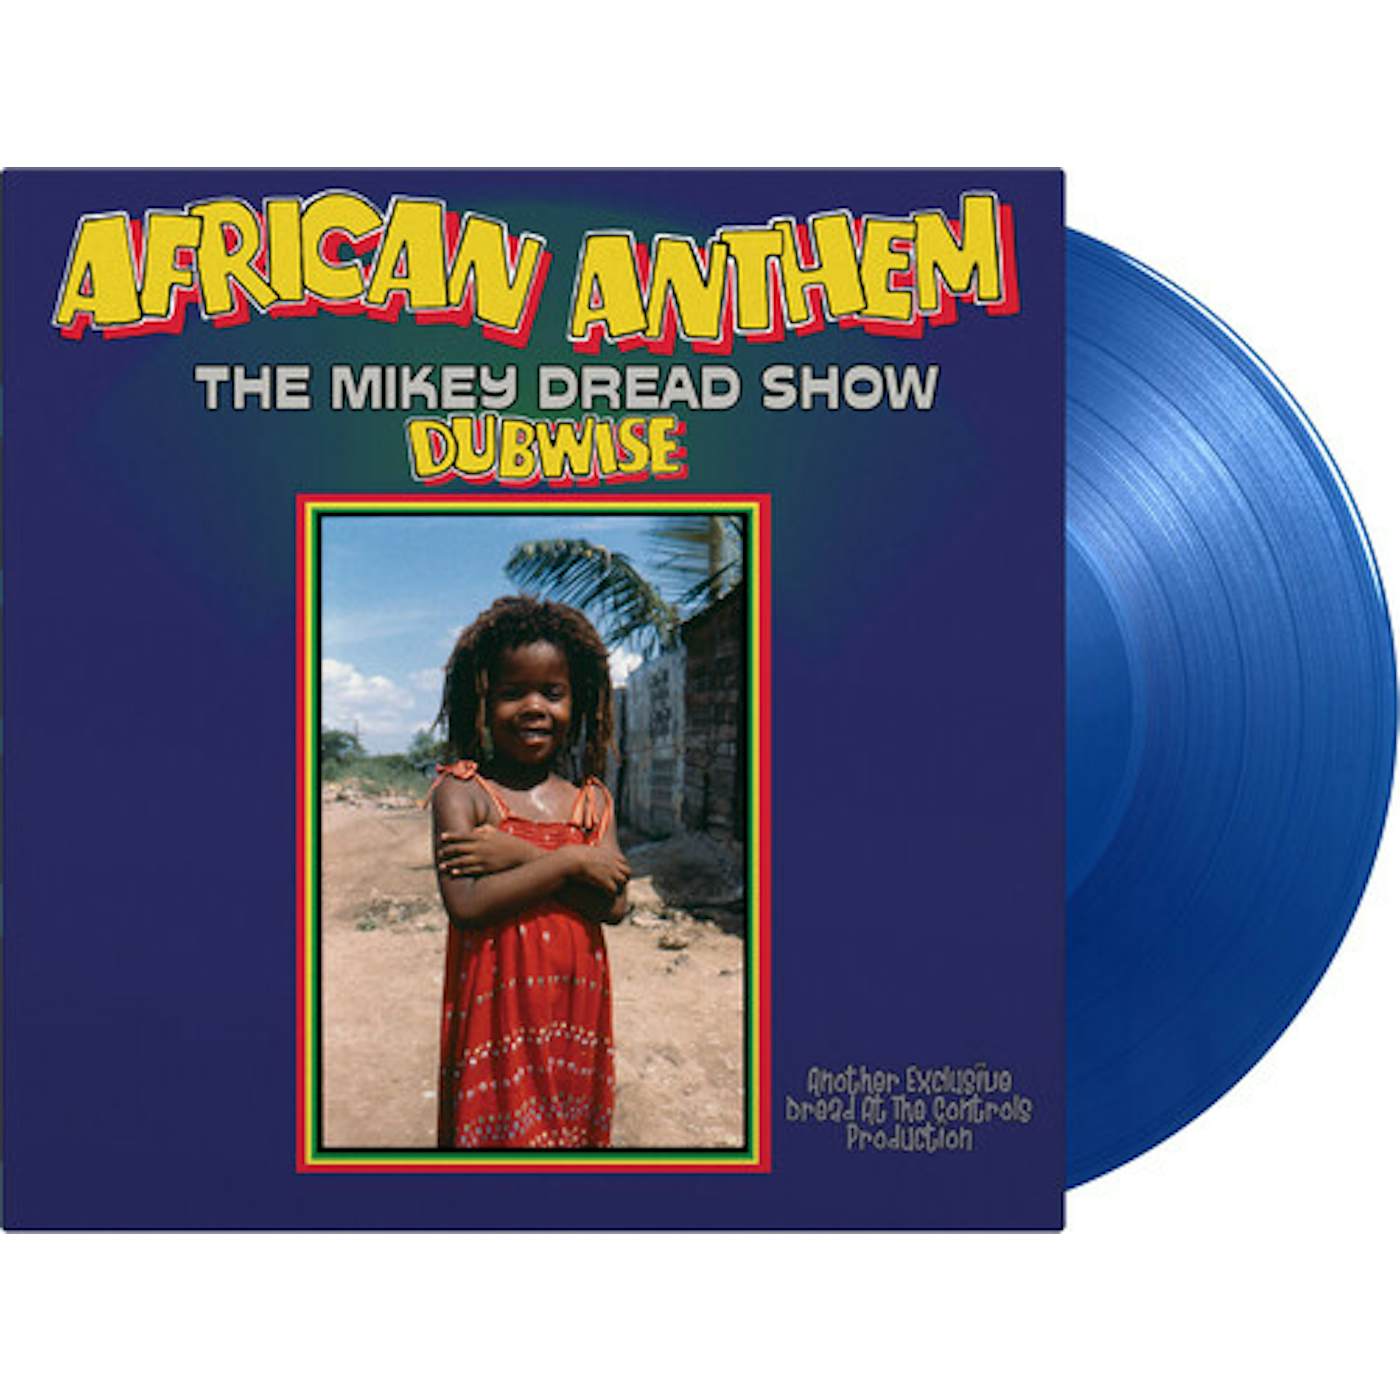 AFRICAN ANTHEM DUBWISE: THE MIKEY DREAD SHOW Vinyl Record